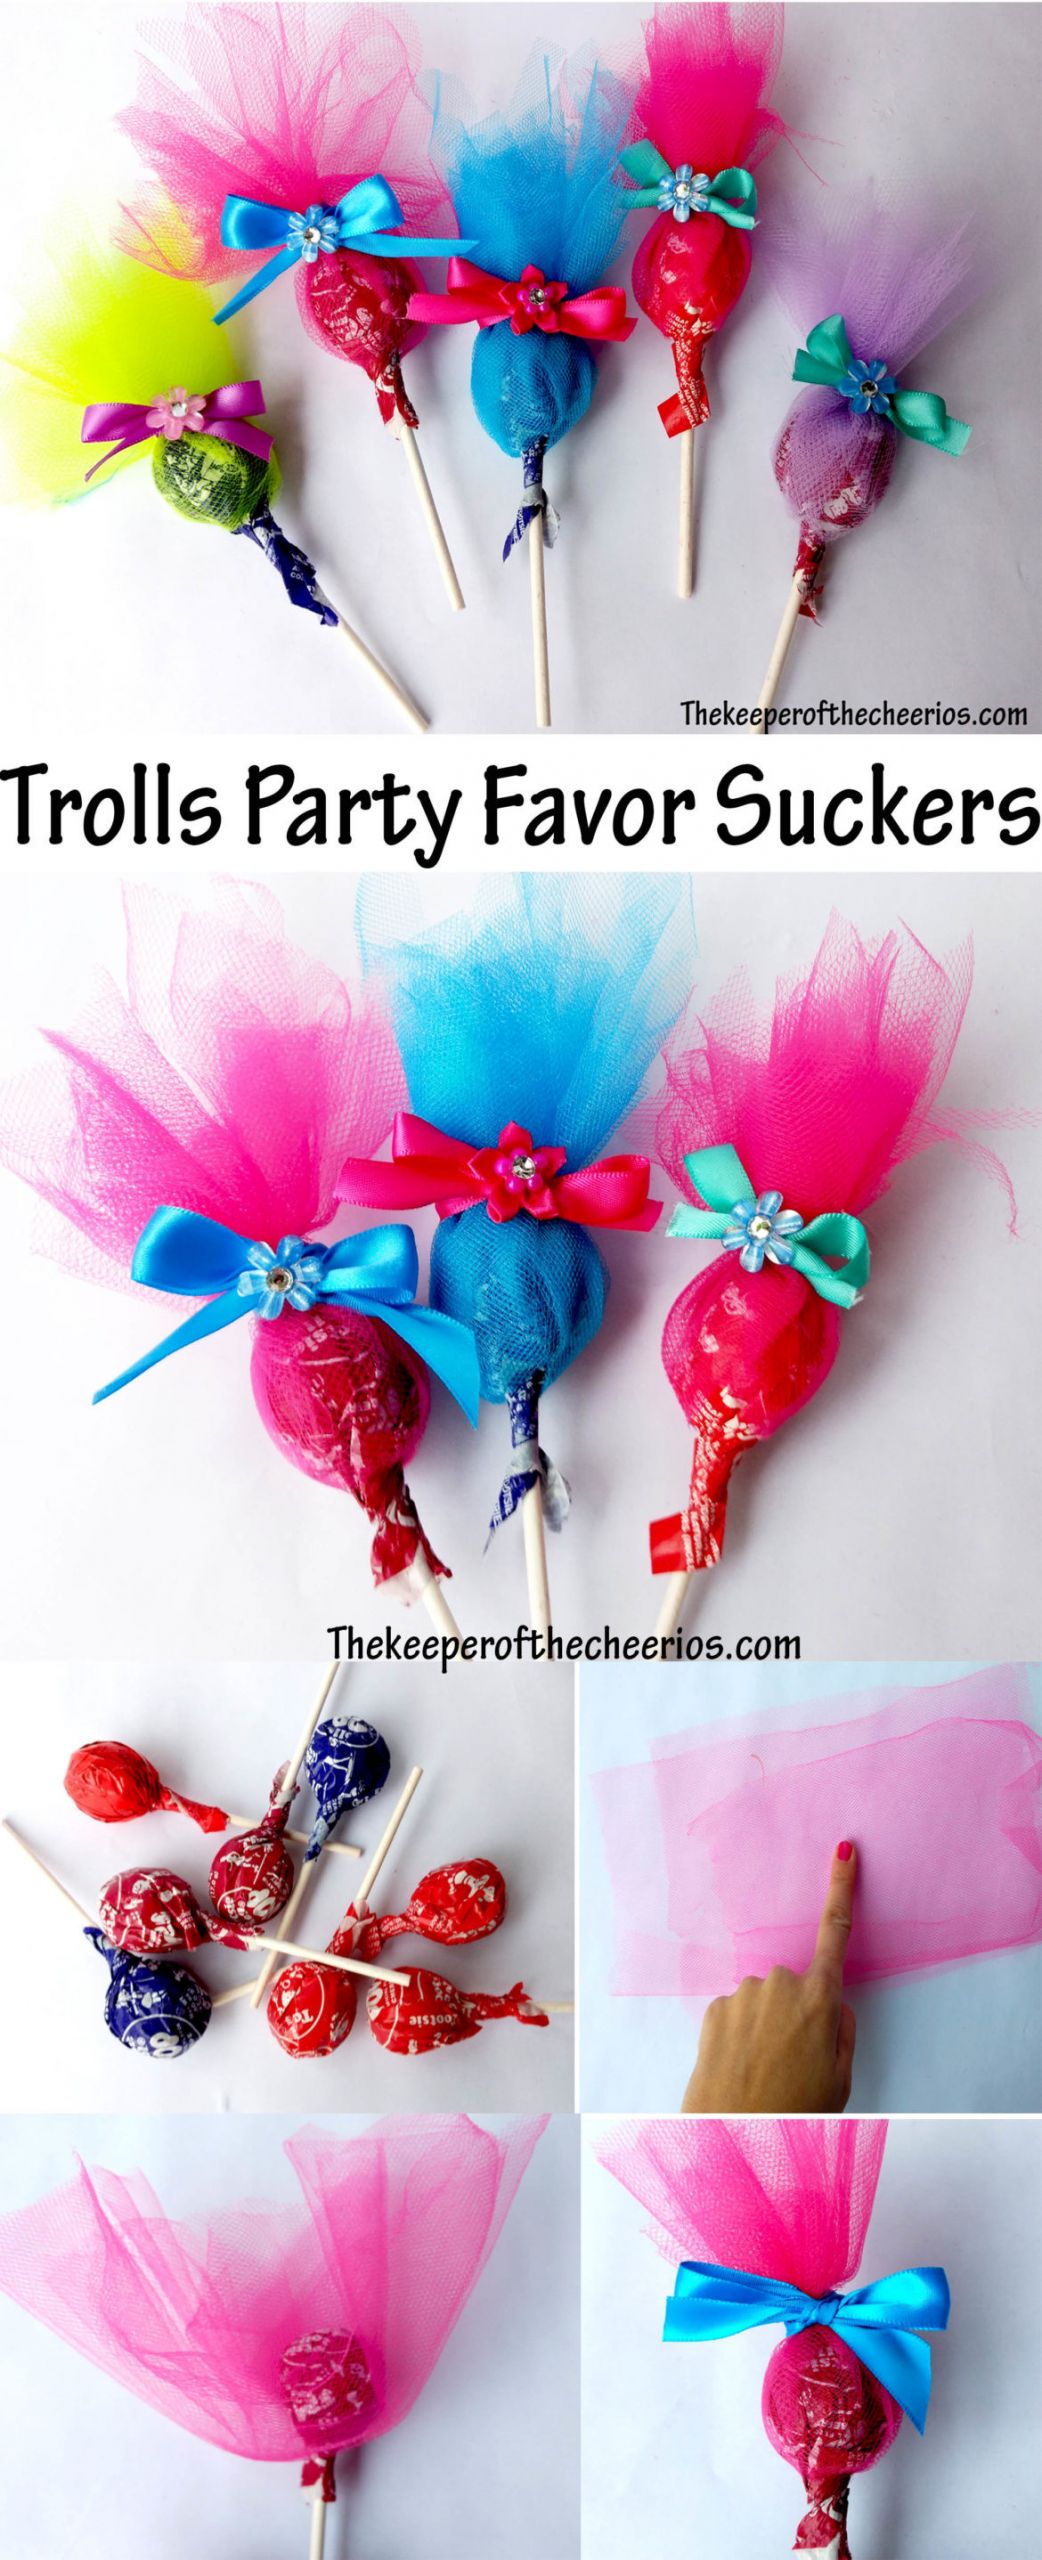 Diy Trolls Party Ideas
 Trolls Party Favor Suckers The Keeper of the Cheerios